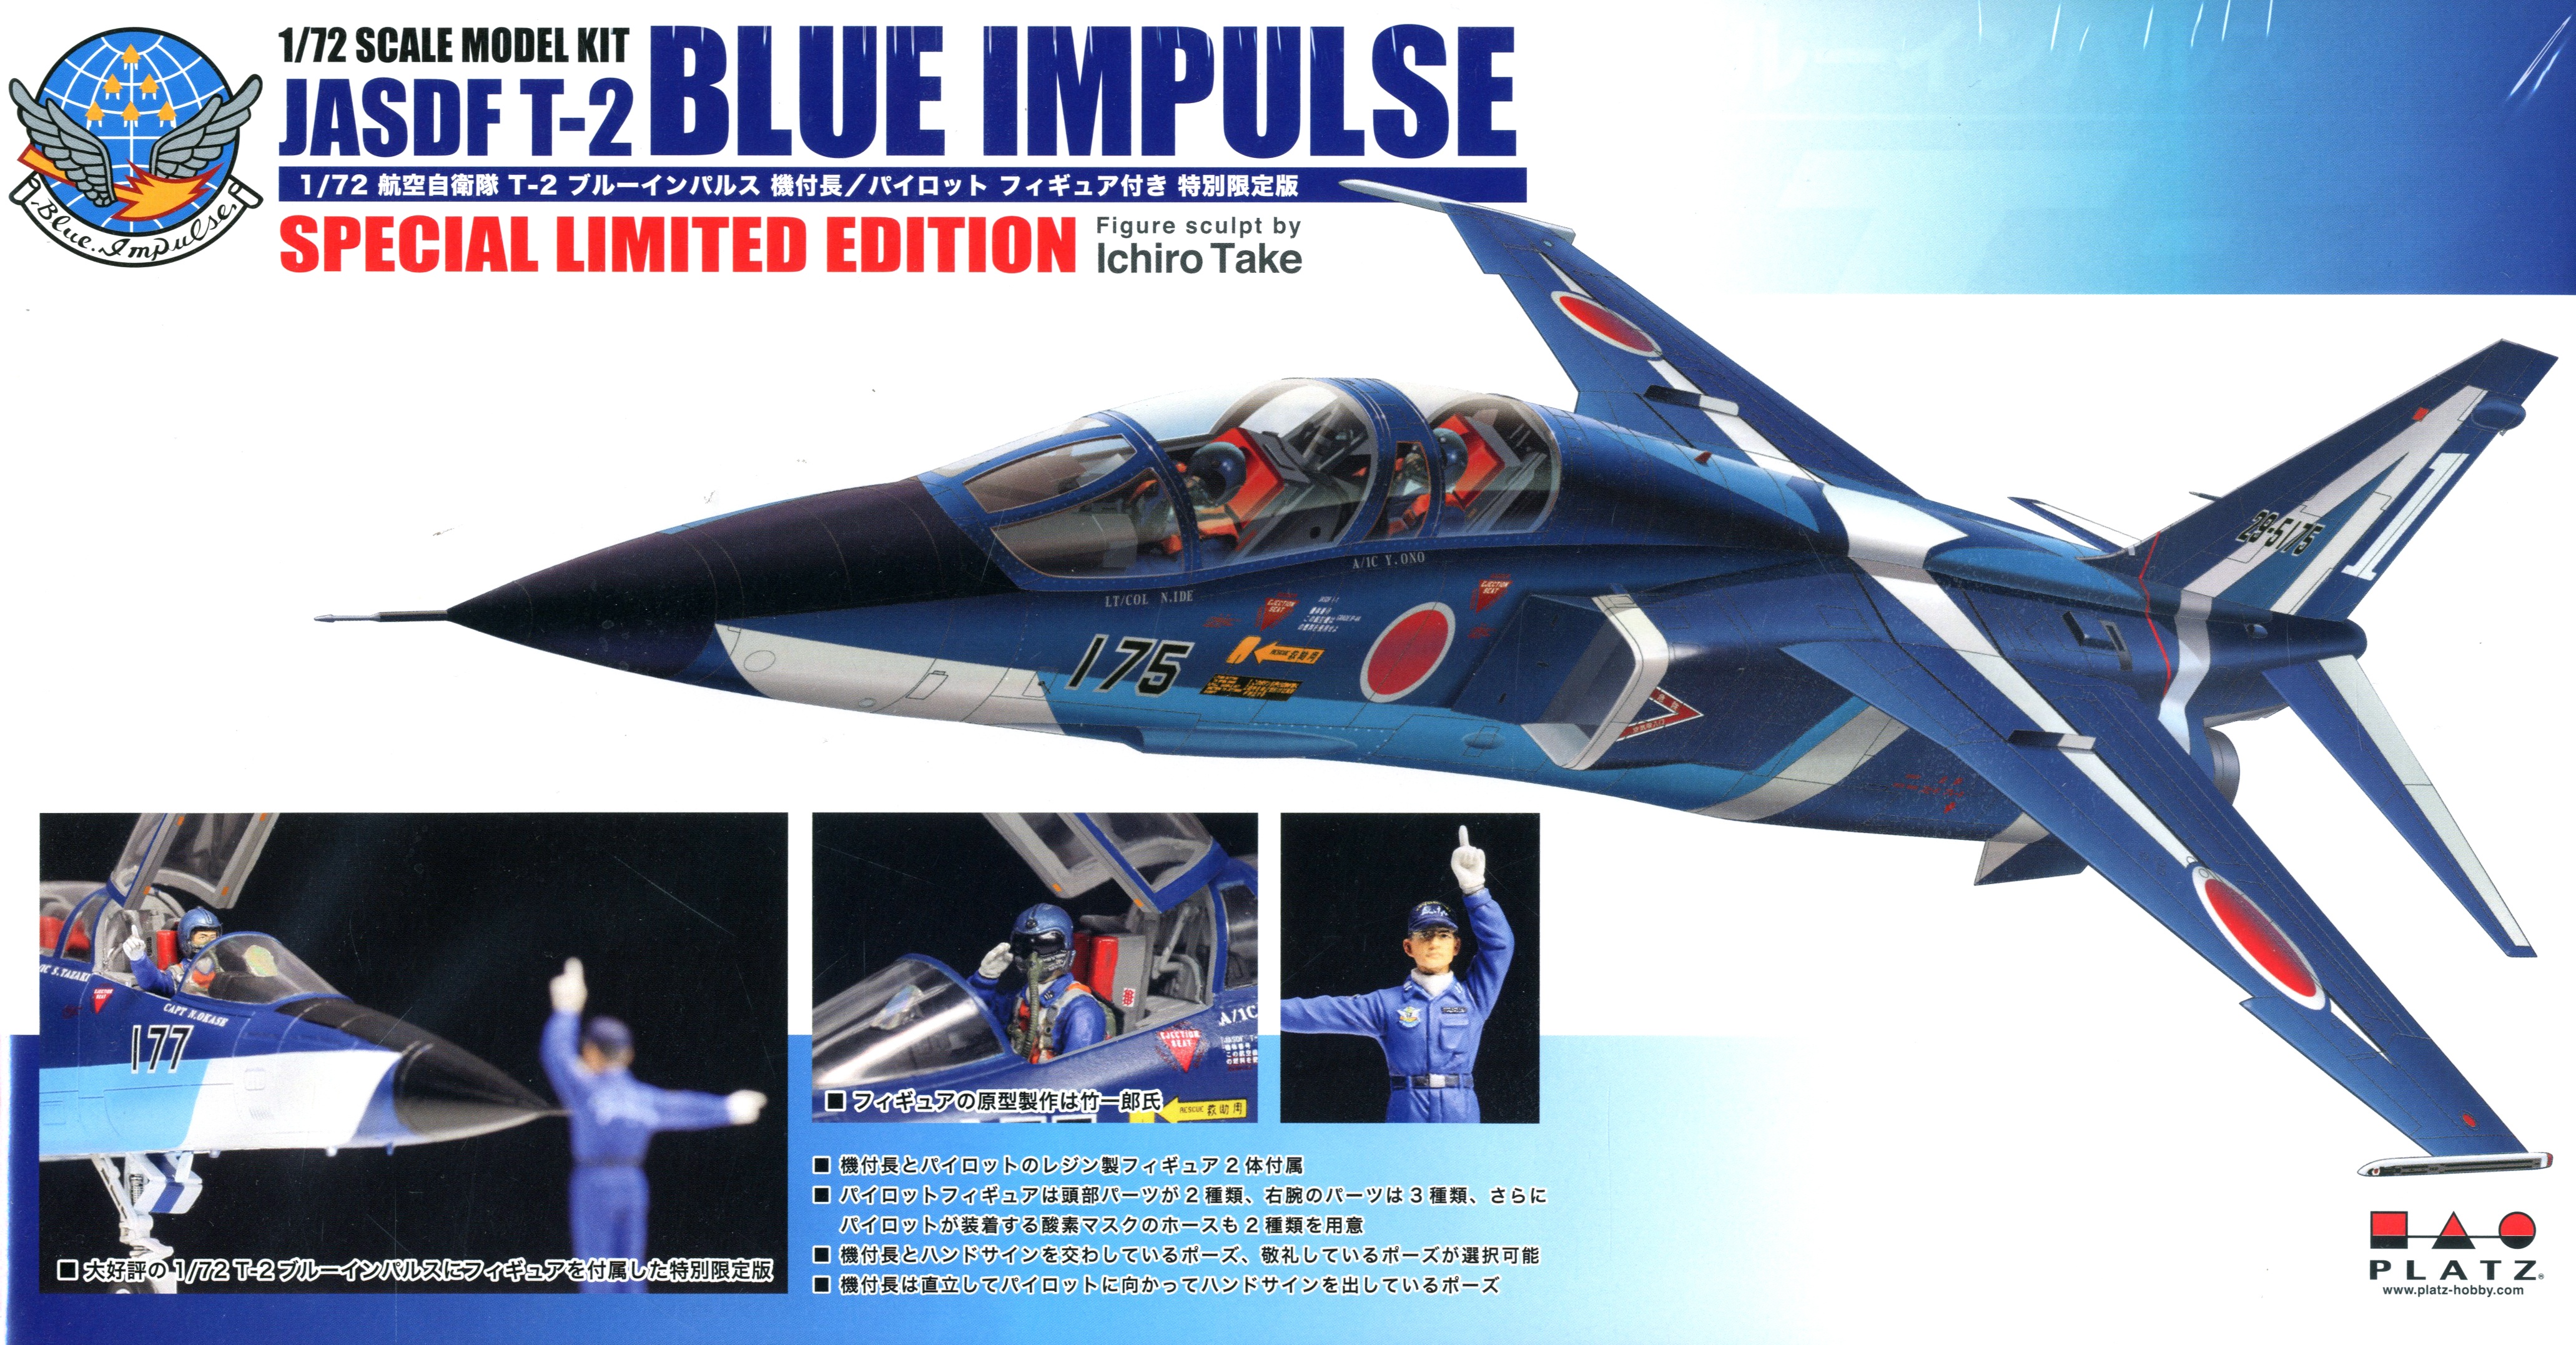 Special　Blue　Edition　JASDF　Limited　T-2　Impulse